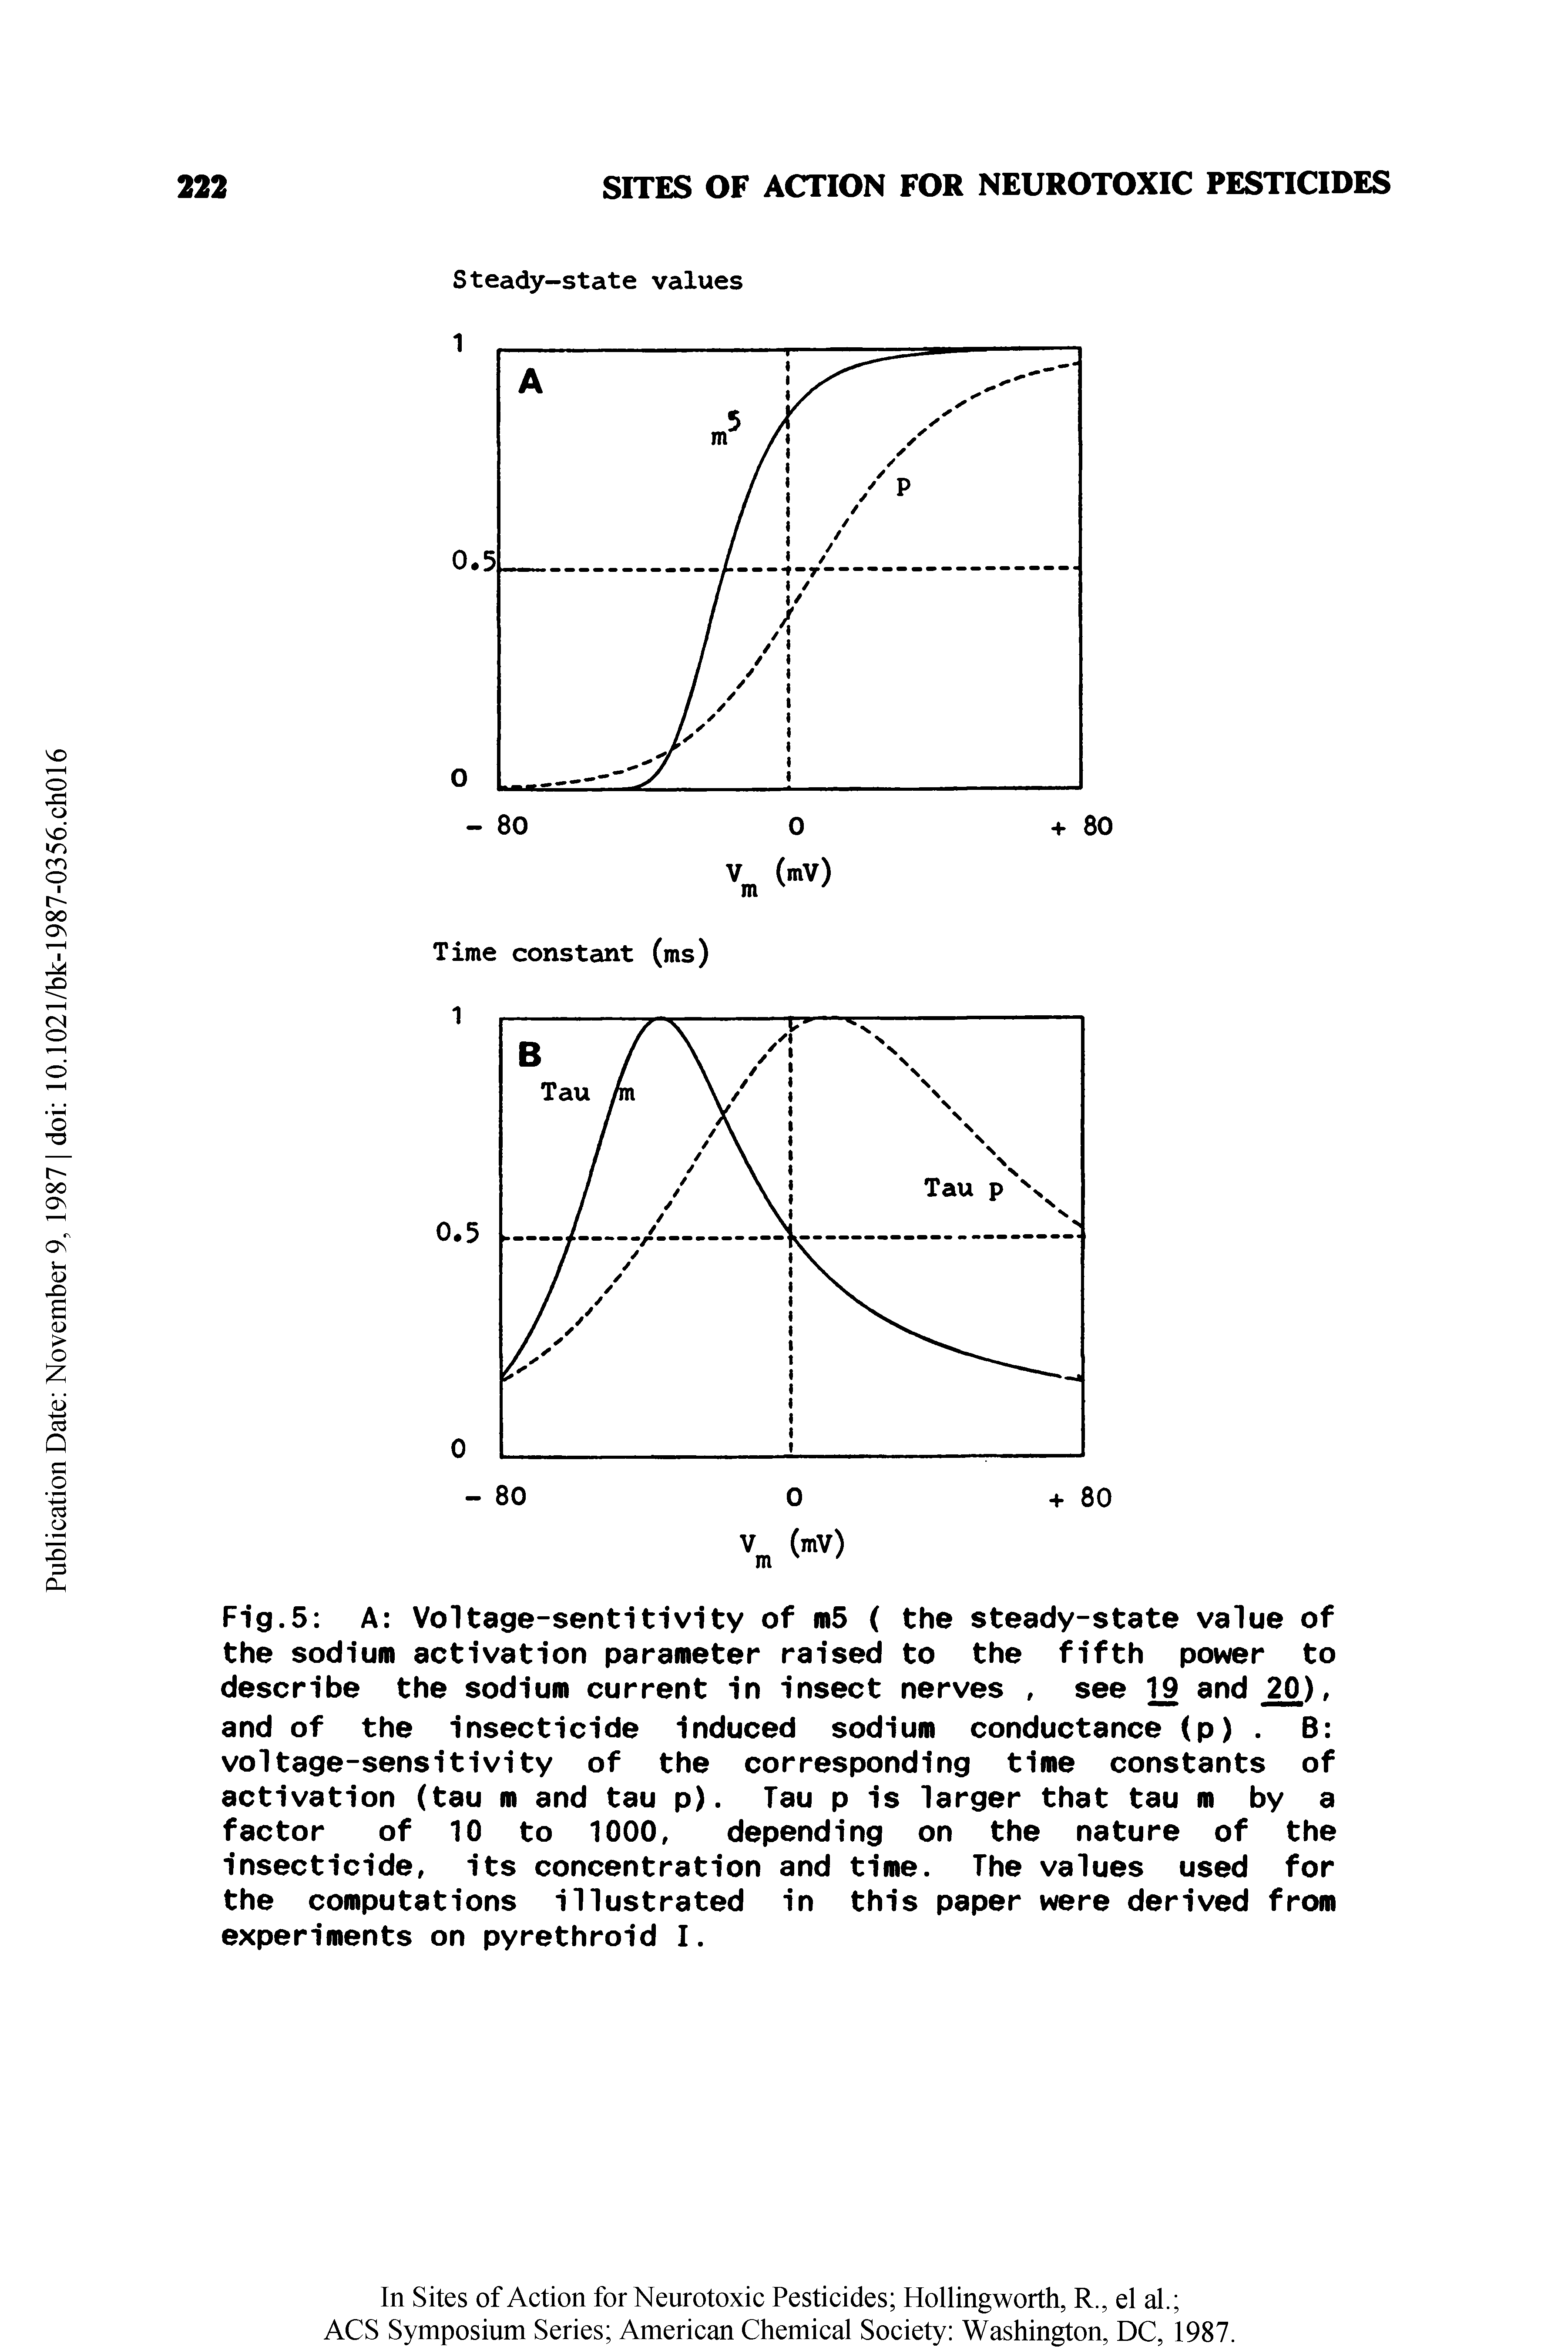 Fig.5 A Voltage-sentitivity of m5 ( the steady-state value of the sodium activation parameter raised to the fifth power to describe the sodium current in insect nerves, see 19 and 20), and of the insecticide induced sodium conductance (p). B voltage-sensitivity of the corresponding time constants of activation (tau m and tau p). Tau p is larger that tau m by a factor of 10 to 1000, depending on the nature of the insecticide, its concentration and time. The values used for the computations illustrated in this paper were derived from experiments on pyrethroid I.